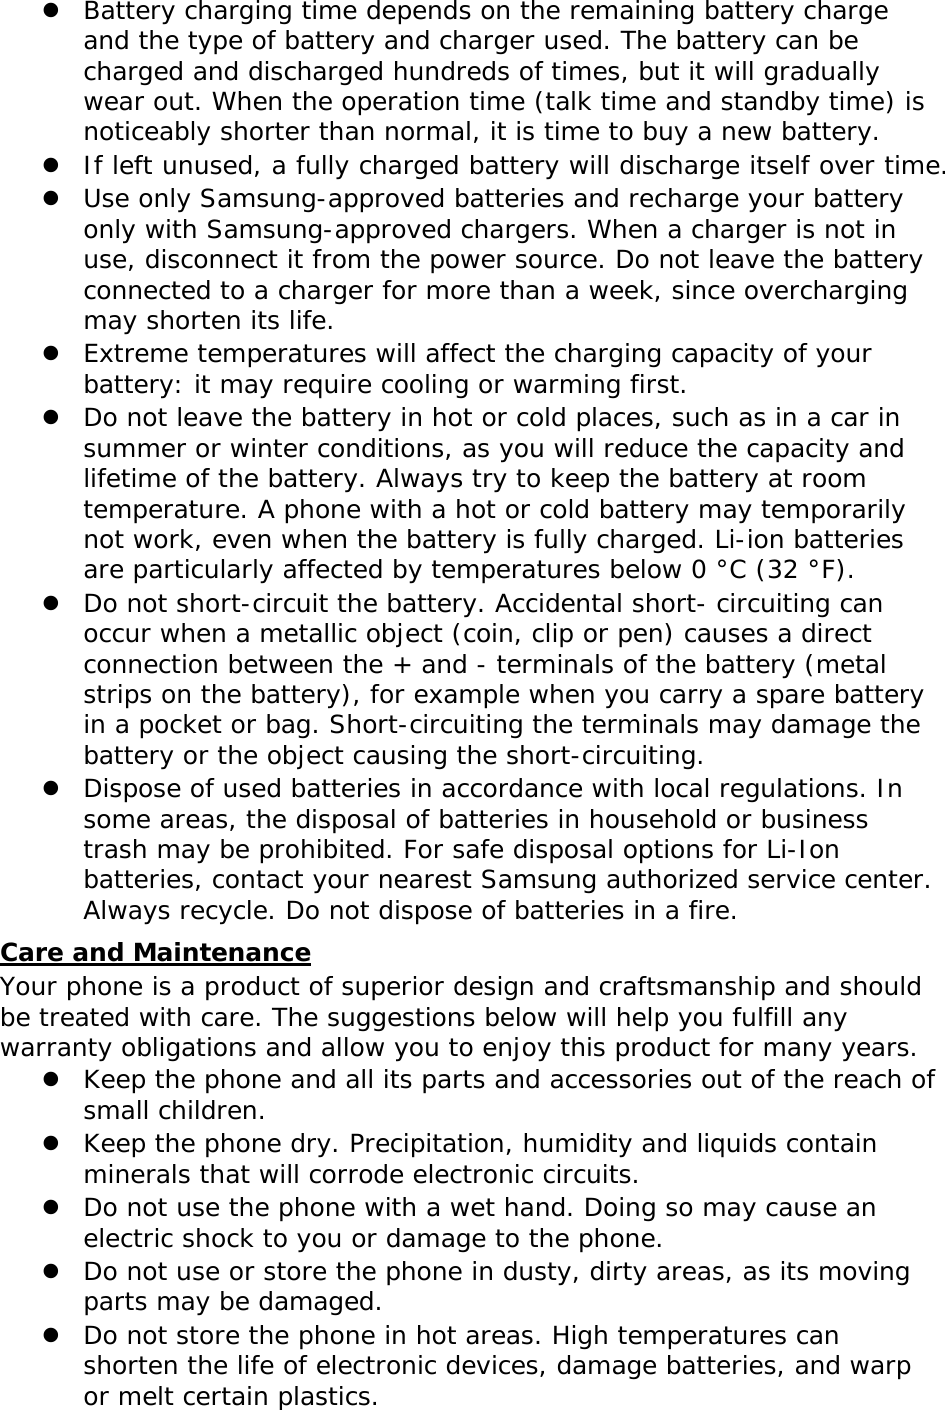  Battery charging time depends on the remaining battery charge and the type of battery and charger used. The battery can be charged and discharged hundreds of times, but it will gradually wear out. When the operation time (talk time and standby time) is noticeably shorter than normal, it is time to buy a new battery.  If left unused, a fully charged battery will discharge itself over time.  Use only Samsung-approved batteries and recharge your battery only with Samsung-approved chargers. When a charger is not in use, disconnect it from the power source. Do not leave the battery connected to a charger for more than a week, since overcharging may shorten its life.  Extreme temperatures will affect the charging capacity of your battery: it may require cooling or warming first.  Do not leave the battery in hot or cold places, such as in a car in summer or winter conditions, as you will reduce the capacity and lifetime of the battery. Always try to keep the battery at room temperature. A phone with a hot or cold battery may temporarily not work, even when the battery is fully charged. Li-ion batteries are particularly affected by temperatures below 0 °C (32 °F).  Do not short-circuit the battery. Accidental short- circuiting can occur when a metallic object (coin, clip or pen) causes a direct connection between the + and - terminals of the battery (metal strips on the battery), for example when you carry a spare battery in a pocket or bag. Short-circuiting the terminals may damage the battery or the object causing the short-circuiting.  Dispose of used batteries in accordance with local regulations. In some areas, the disposal of batteries in household or business trash may be prohibited. For safe disposal options for Li-Ion batteries, contact your nearest Samsung authorized service center. Always recycle. Do not dispose of batteries in a fire. Care and Maintenance Your phone is a product of superior design and craftsmanship and should be treated with care. The suggestions below will help you fulfill any warranty obligations and allow you to enjoy this product for many years.  Keep the phone and all its parts and accessories out of the reach of small children.  Keep the phone dry. Precipitation, humidity and liquids contain minerals that will corrode electronic circuits.  Do not use the phone with a wet hand. Doing so may cause an electric shock to you or damage to the phone.  Do not use or store the phone in dusty, dirty areas, as its moving parts may be damaged.  Do not store the phone in hot areas. High temperatures can shorten the life of electronic devices, damage batteries, and warp or melt certain plastics. 